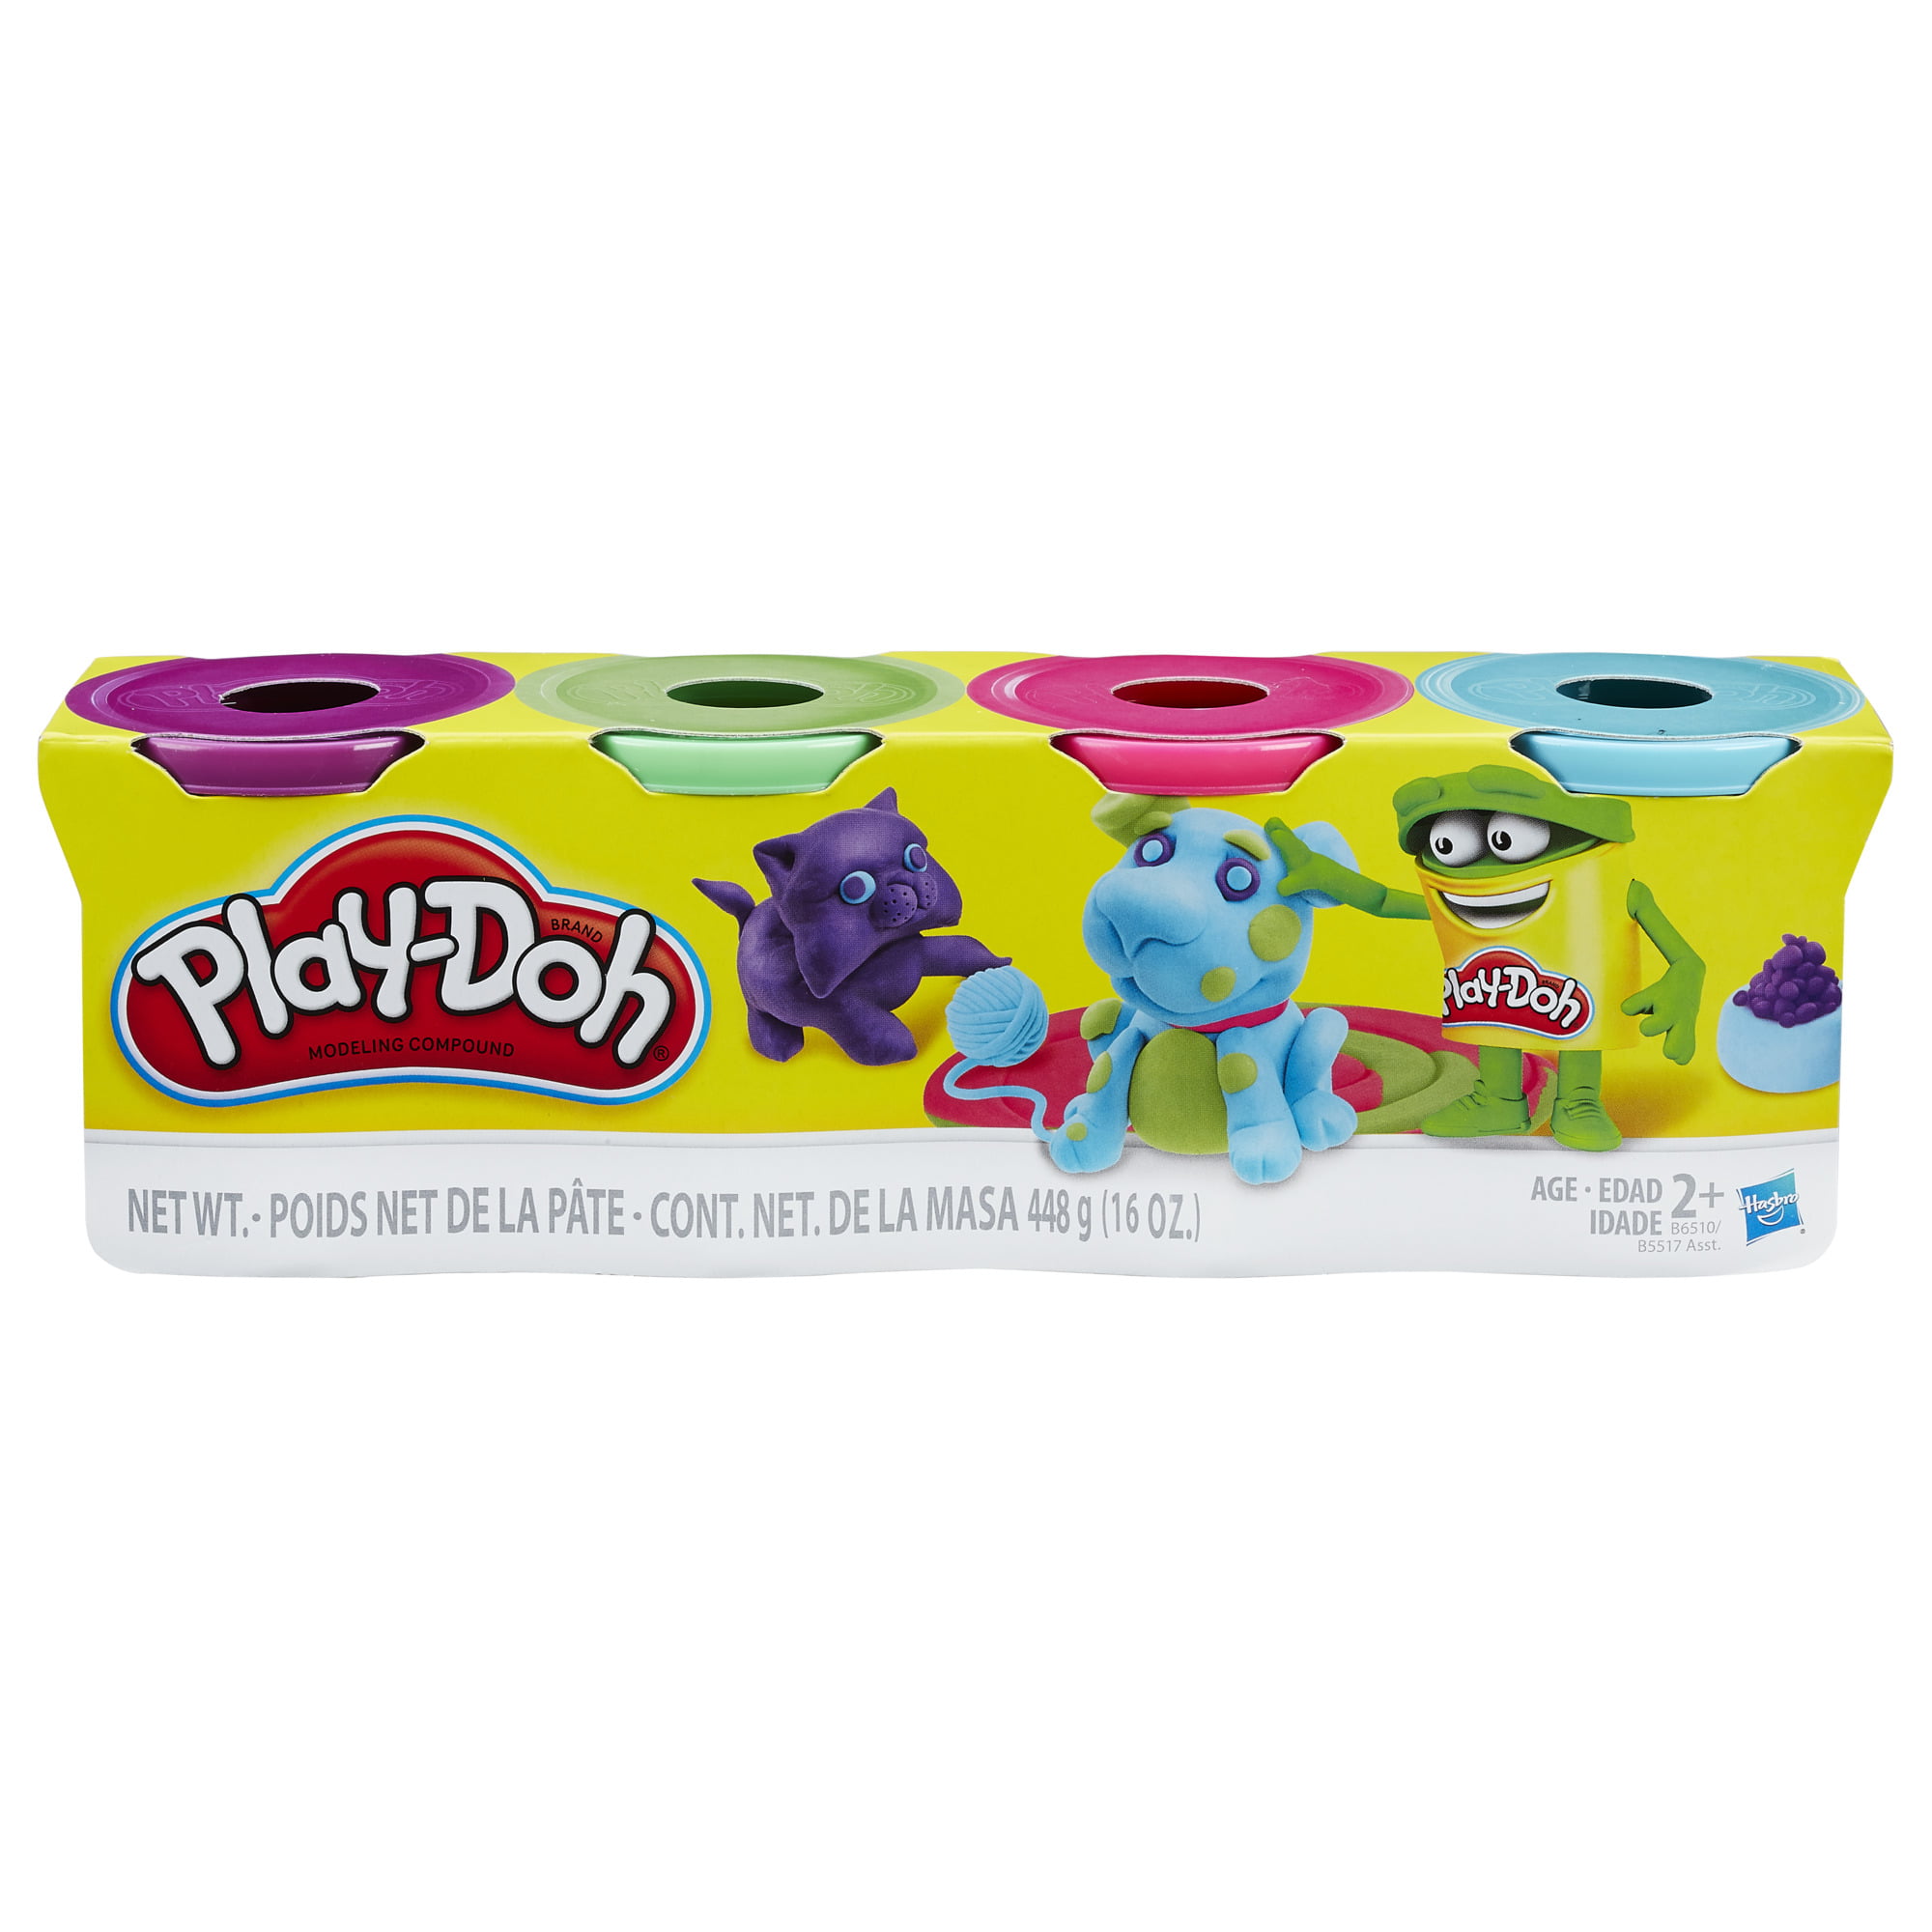 Play-Doh Play dough Glow in Dark glo 4 pack Green Pink Yellow Blue  Halloween NEW